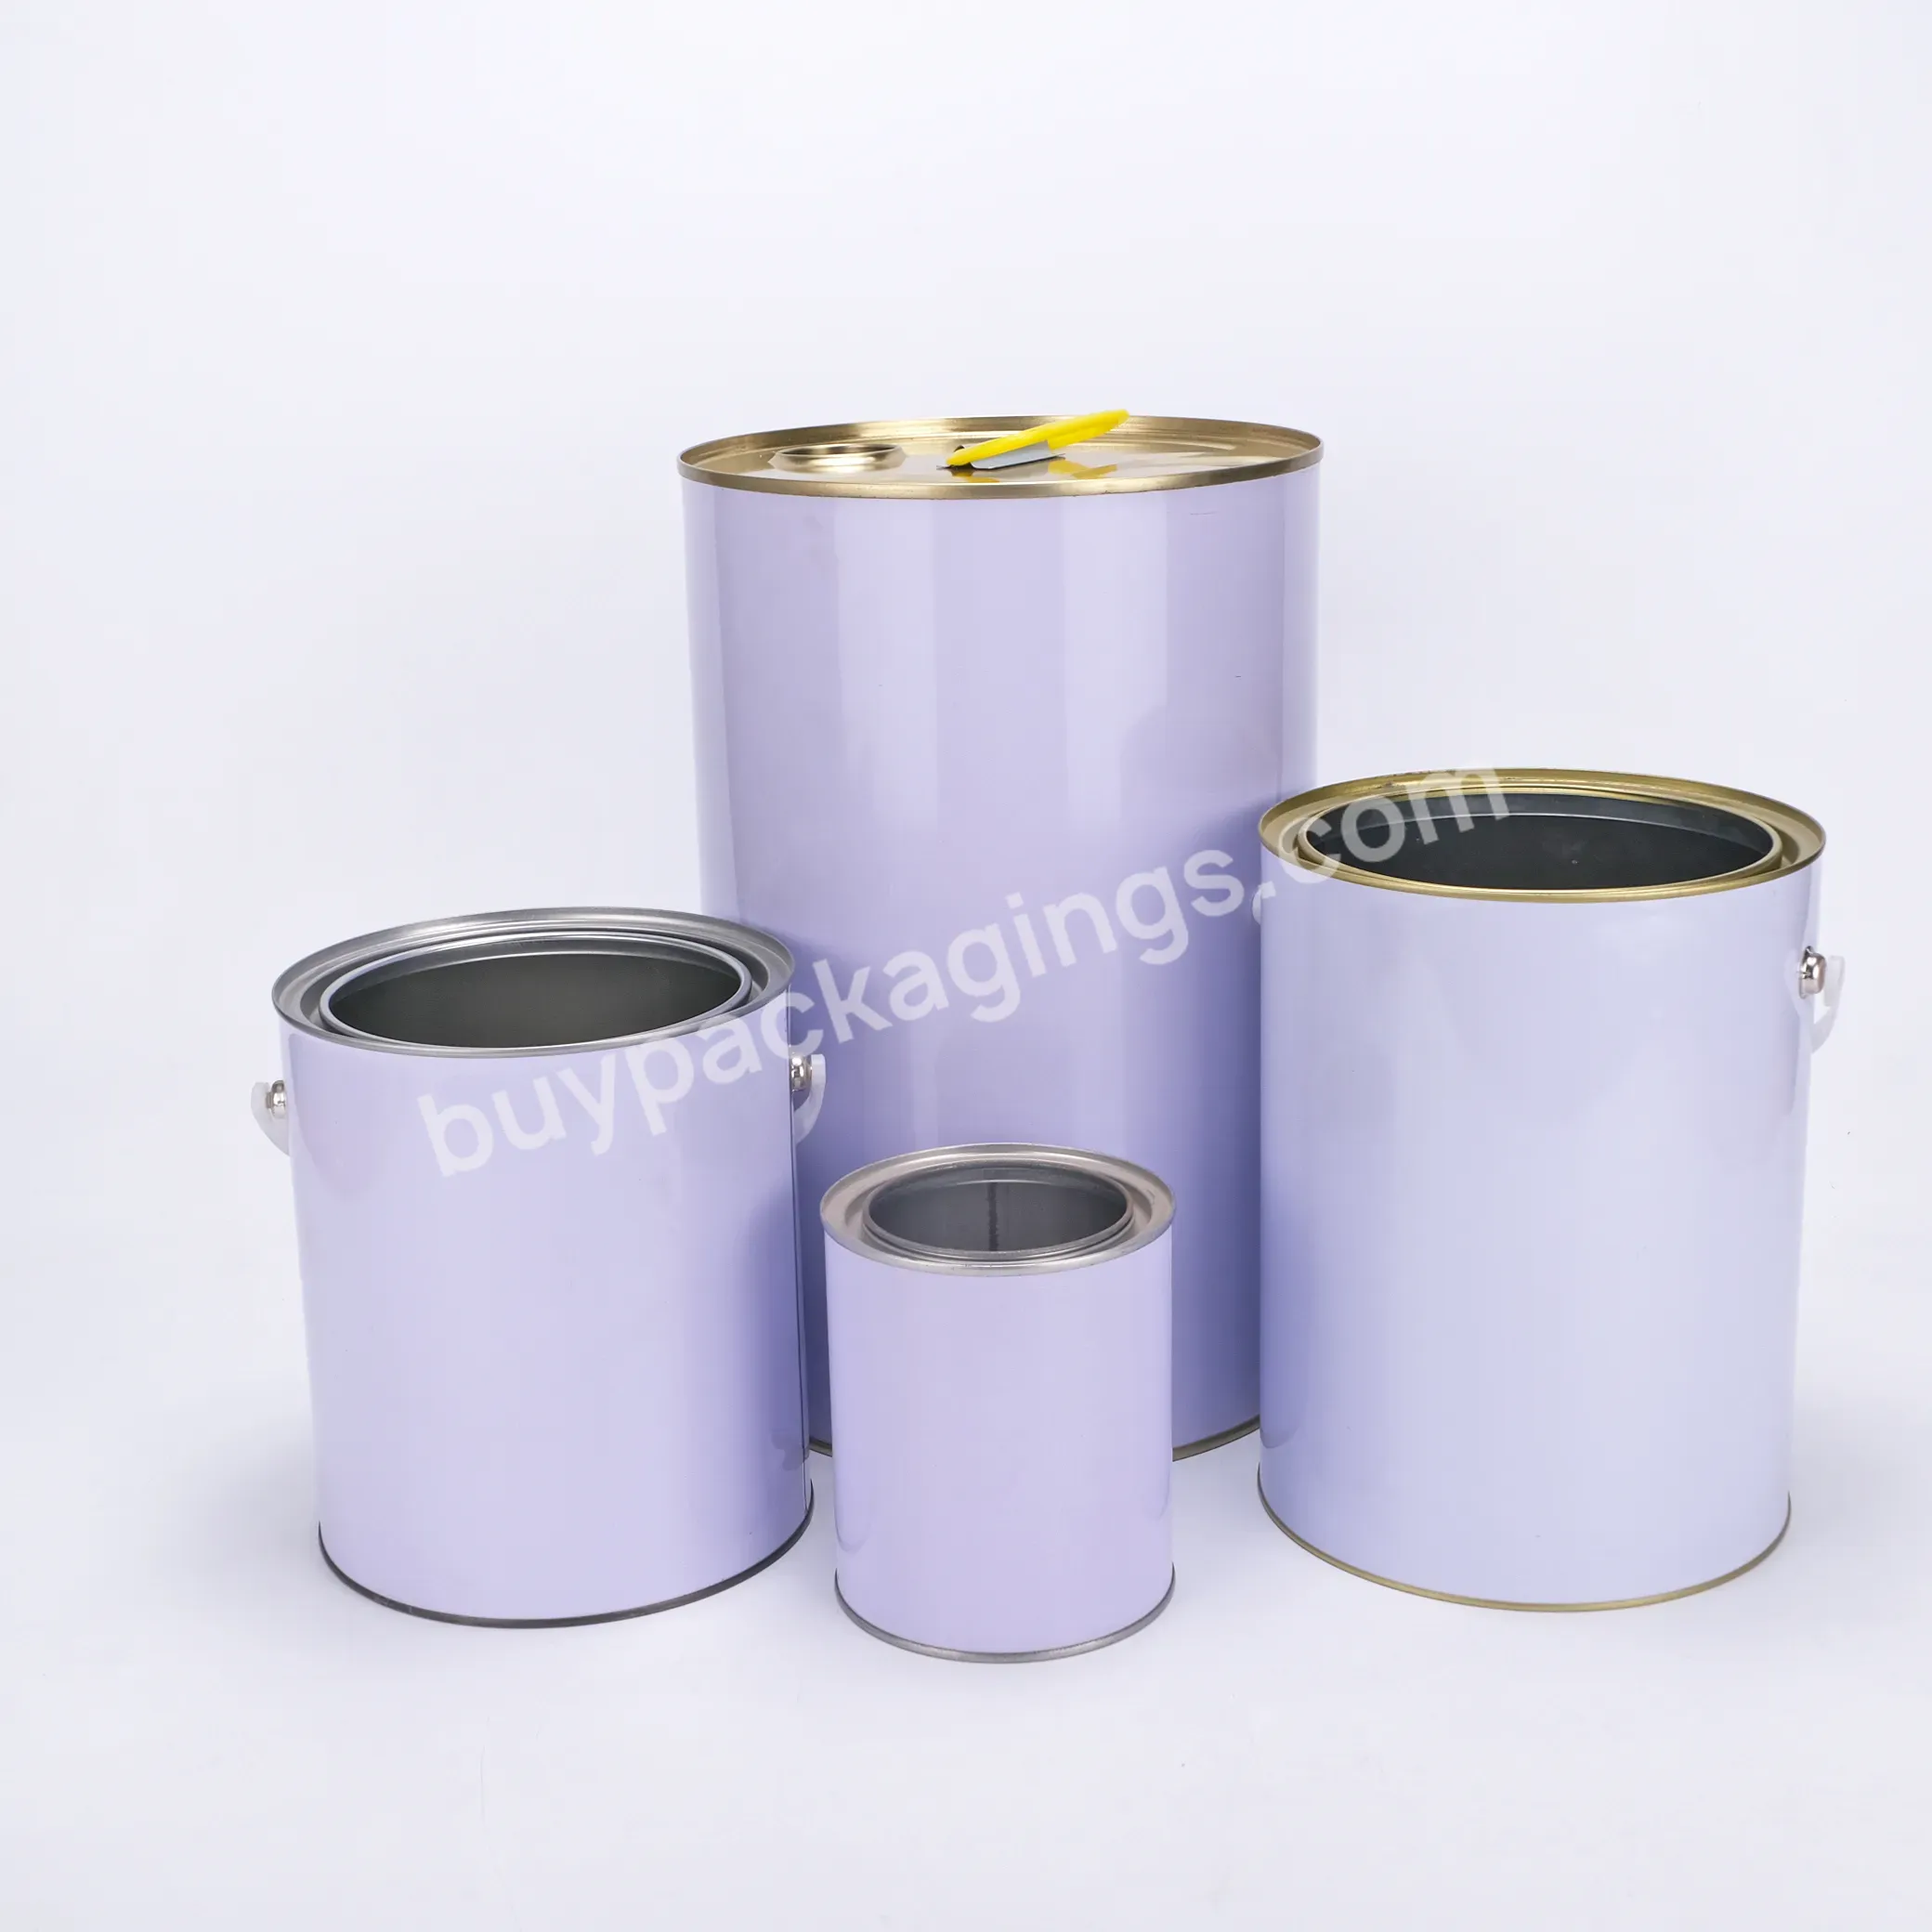 Metal Paint Bucket Custom Empty Chemical Round Unapproved Metal Paint Bucket With Lock Ring For Paint Coating - Buy Metal Bucket Beer,Gold Metal Buckets,Tiny Metal Buckets.